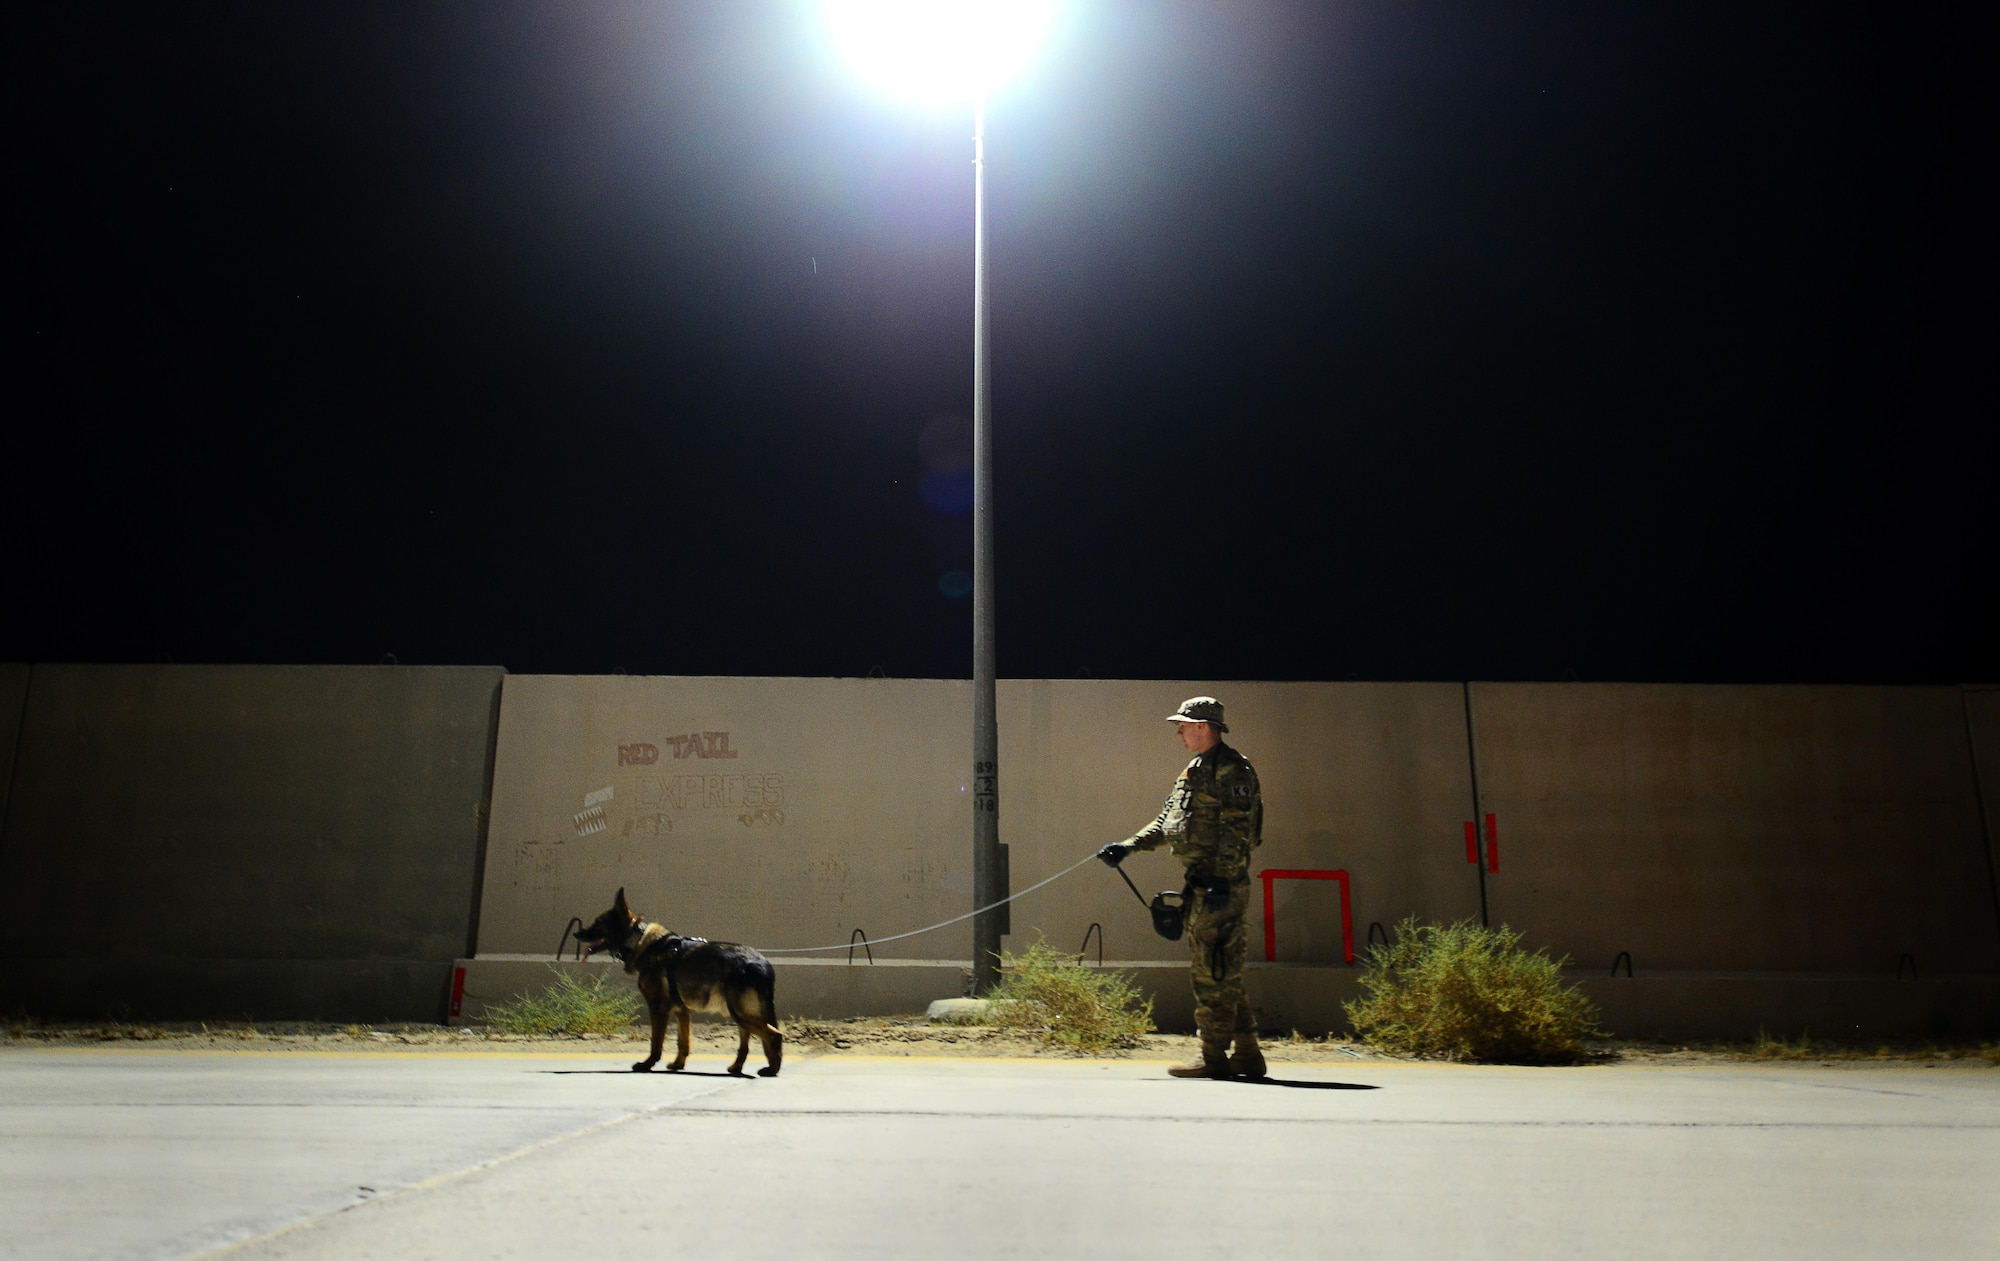 U.S. Air Force Senior Airman Carlton Isaacson, a military working dog handler assigned to the 407th Expeditionary Security Forces Squadron and his partner Egon, patrol the flightline in Southwest Asia on May 23, 2017. Isaacson and Egon have been partners for two years now and are deployed in support of Operation Inherent Resolve. Military working dogs are the first line of defense when it comes to explosive detection and provide security sweeps throughout the installation. (U.S. Air Force photo by Tech Sgt. Andy M. Kin)